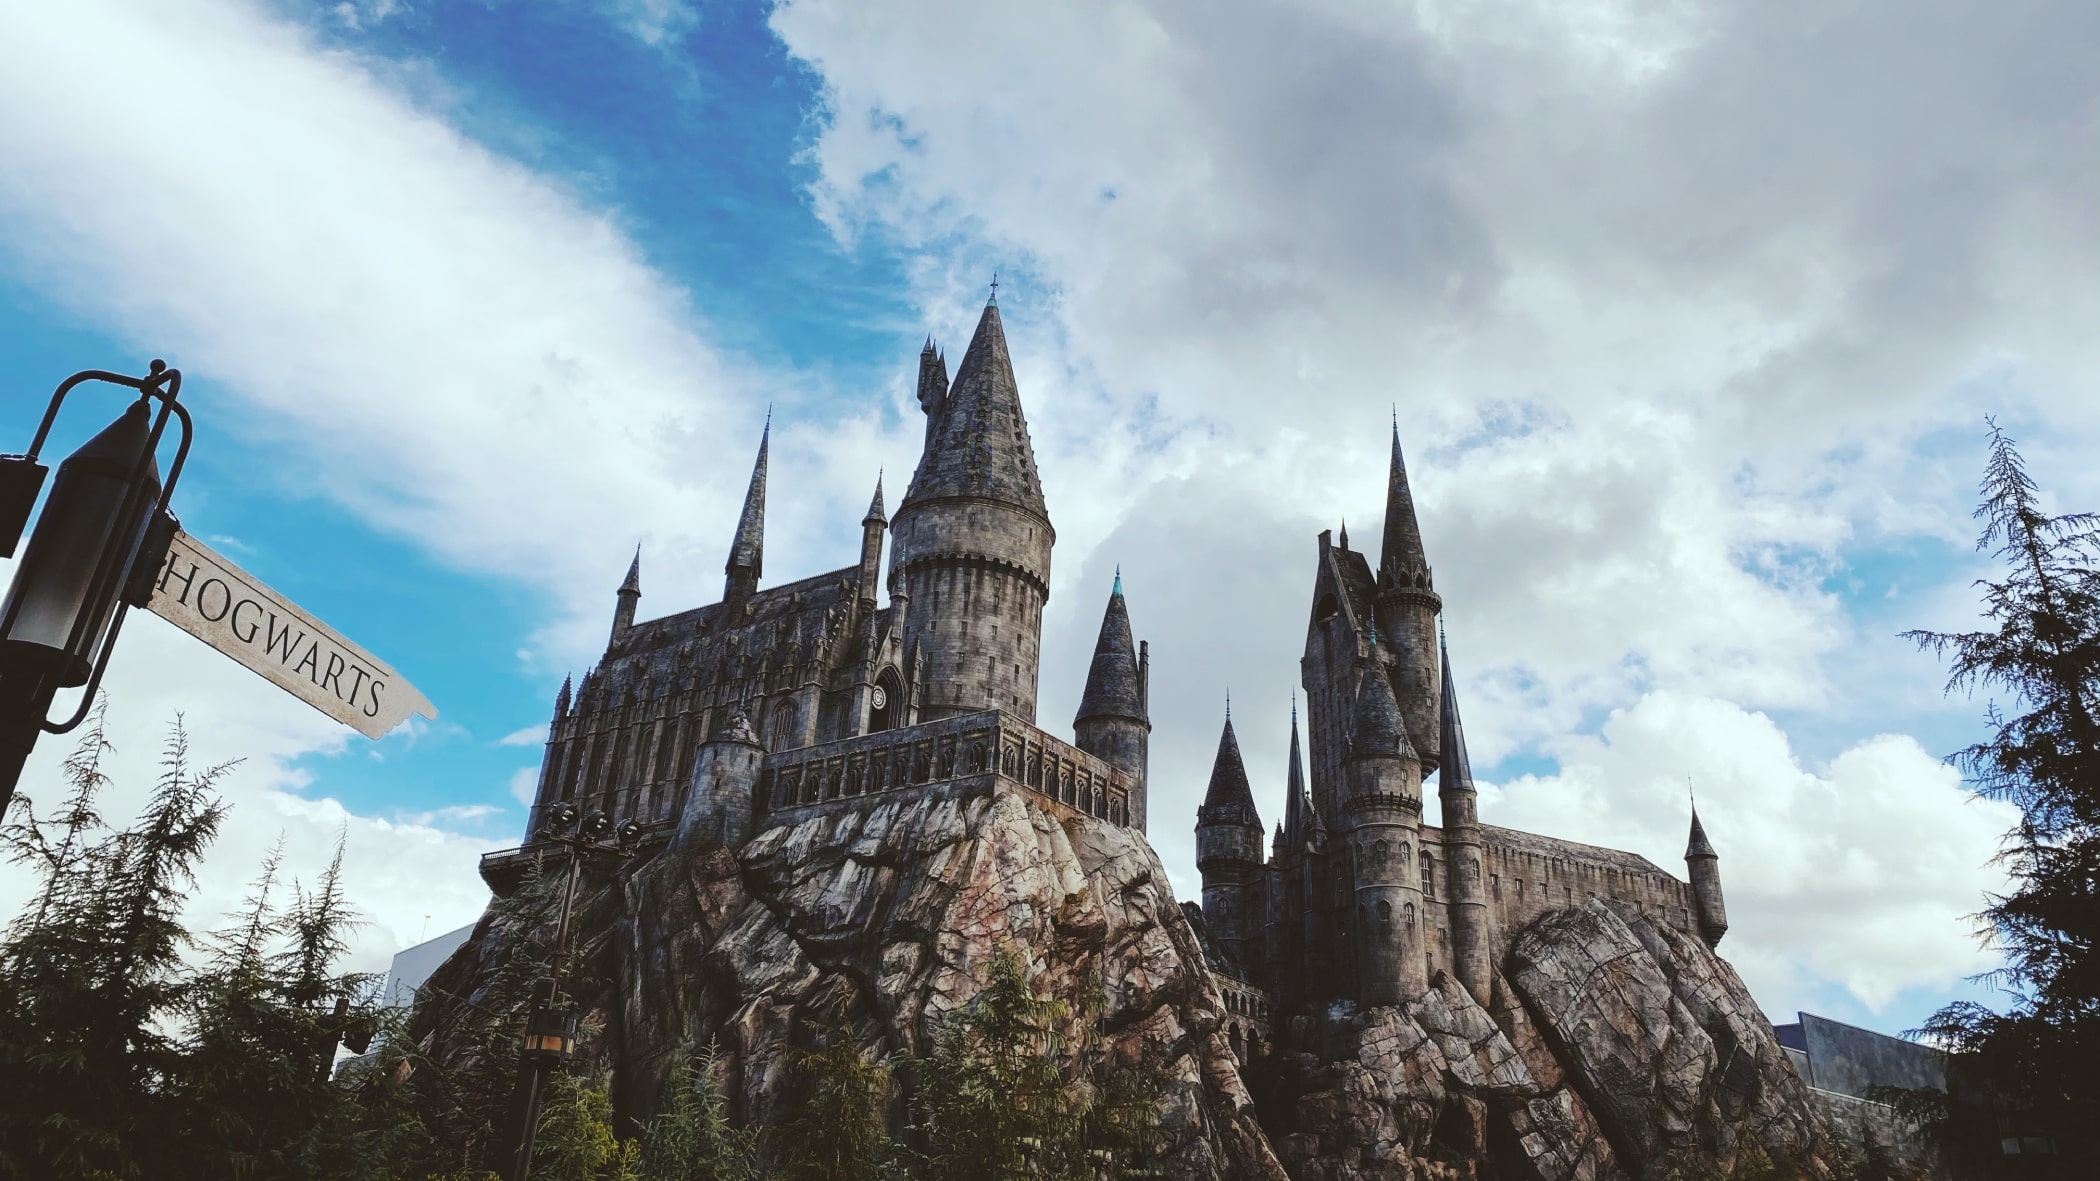 Visiting Hogwarts is one of the most fun things to do in Florida